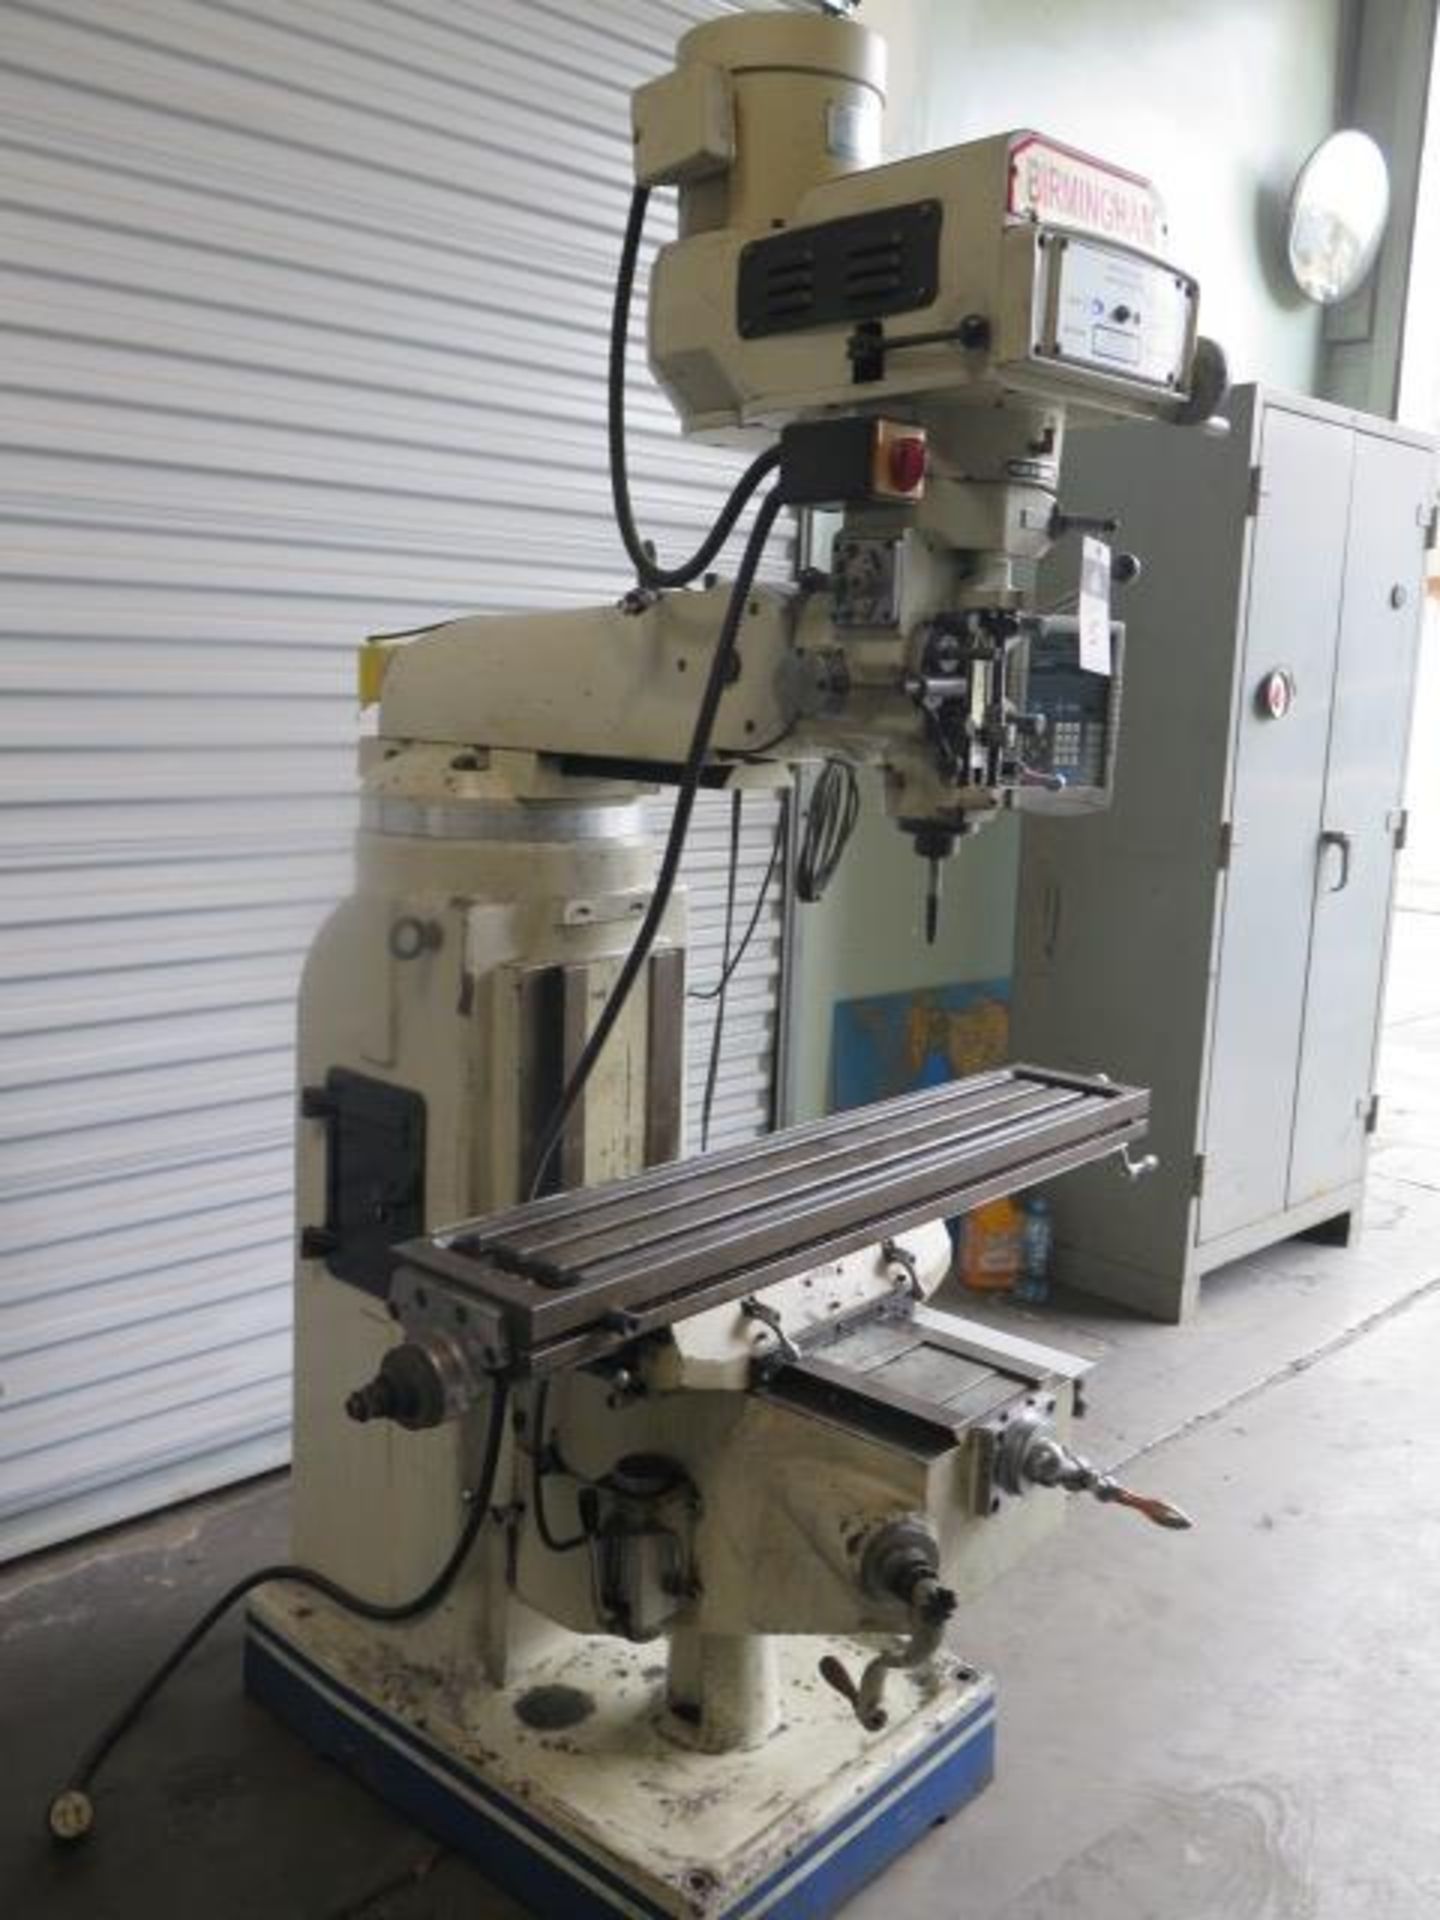 2006 Birmingham X6323A Vertical Mill s/n 063416 w/ Newall C80 Programmable DRO, 3Hp Motor,SOLD AS IS - Image 3 of 11